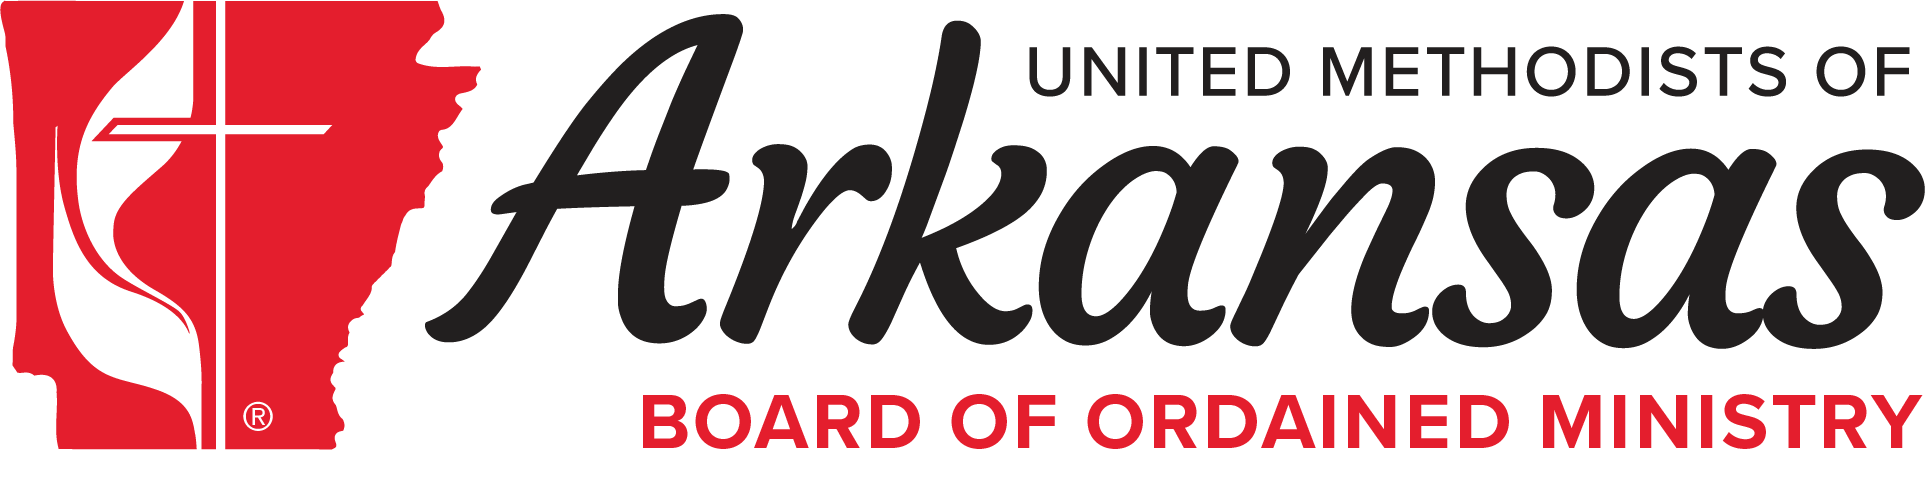 United Methodists of Arkansas Board of Ordained Ministry